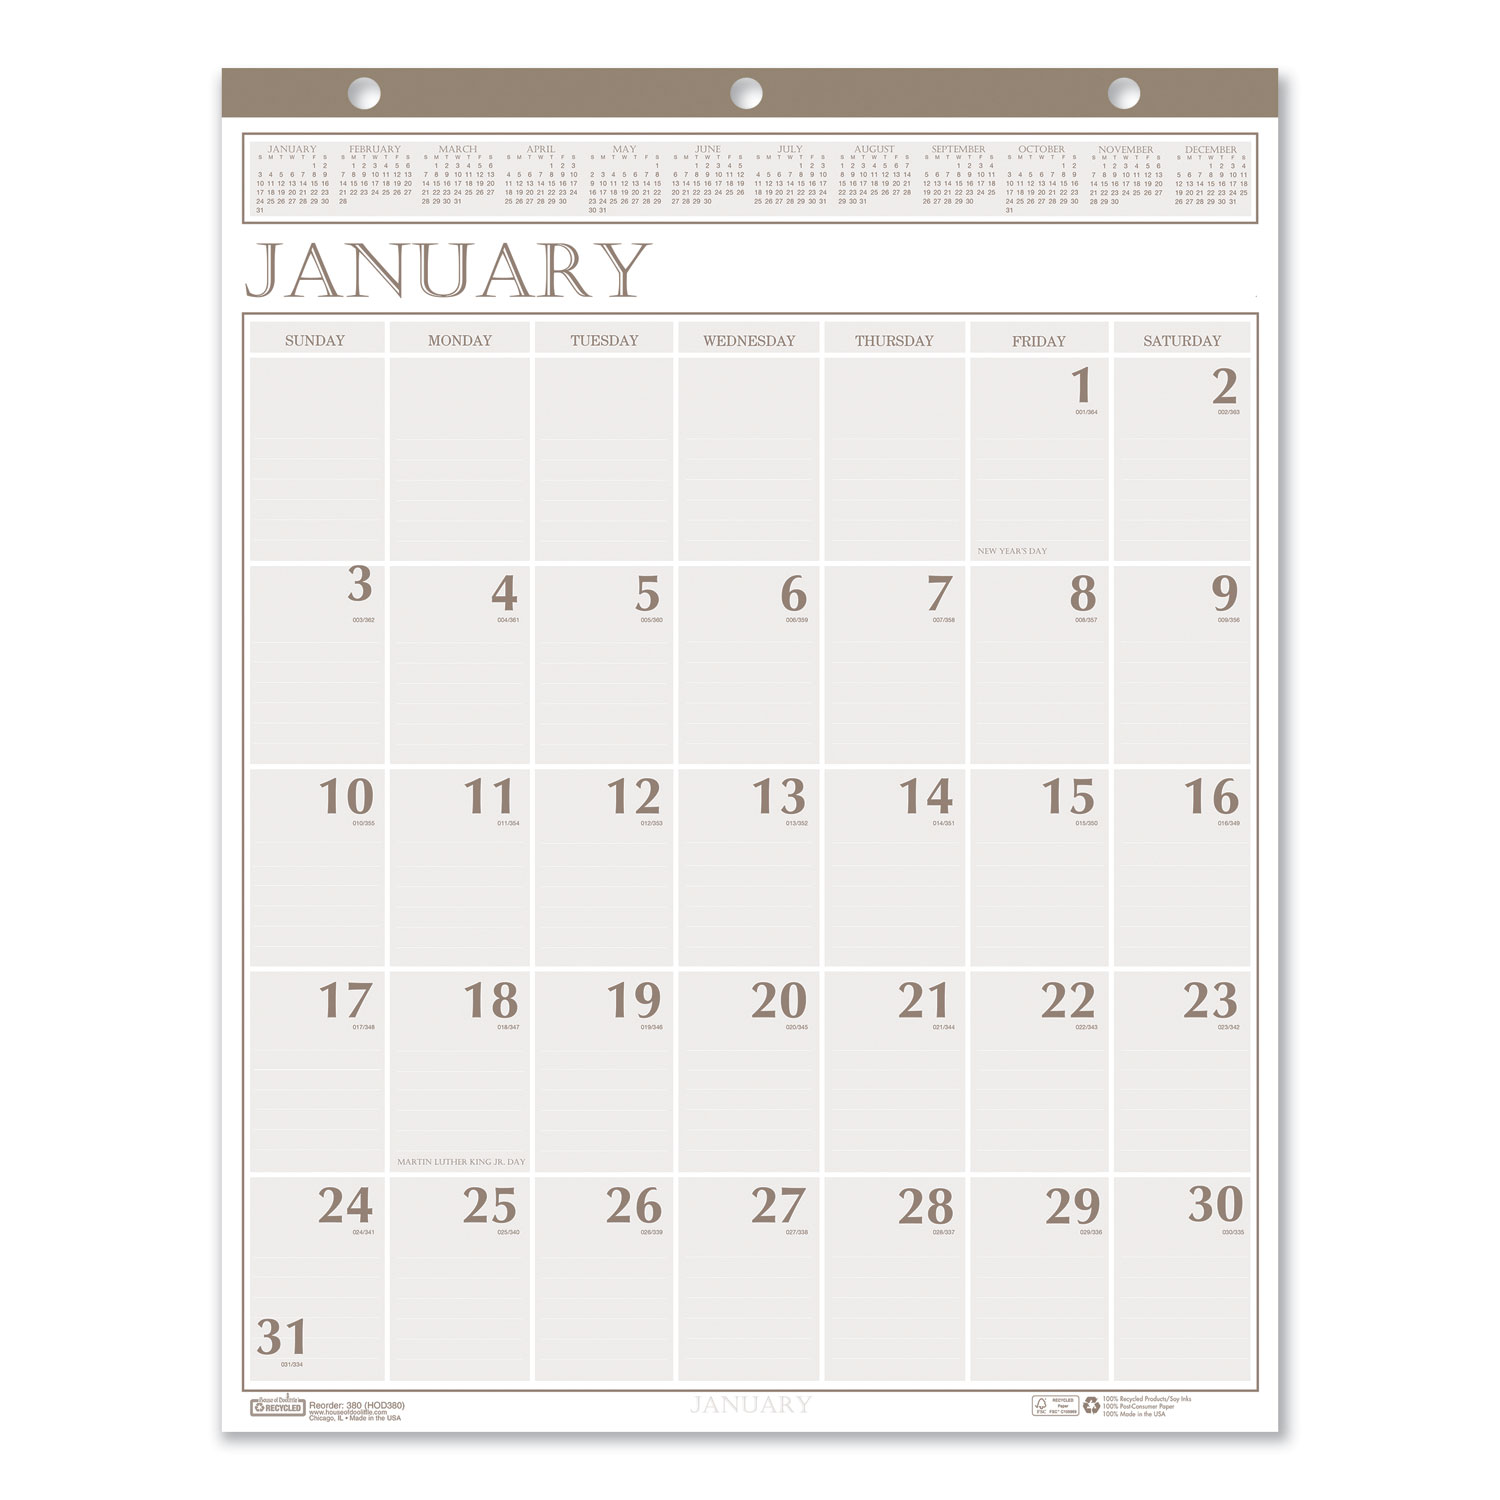 Recycled Large Print Monthly Wall Calendar, Leatherette Binding, 20 x 26, 2022